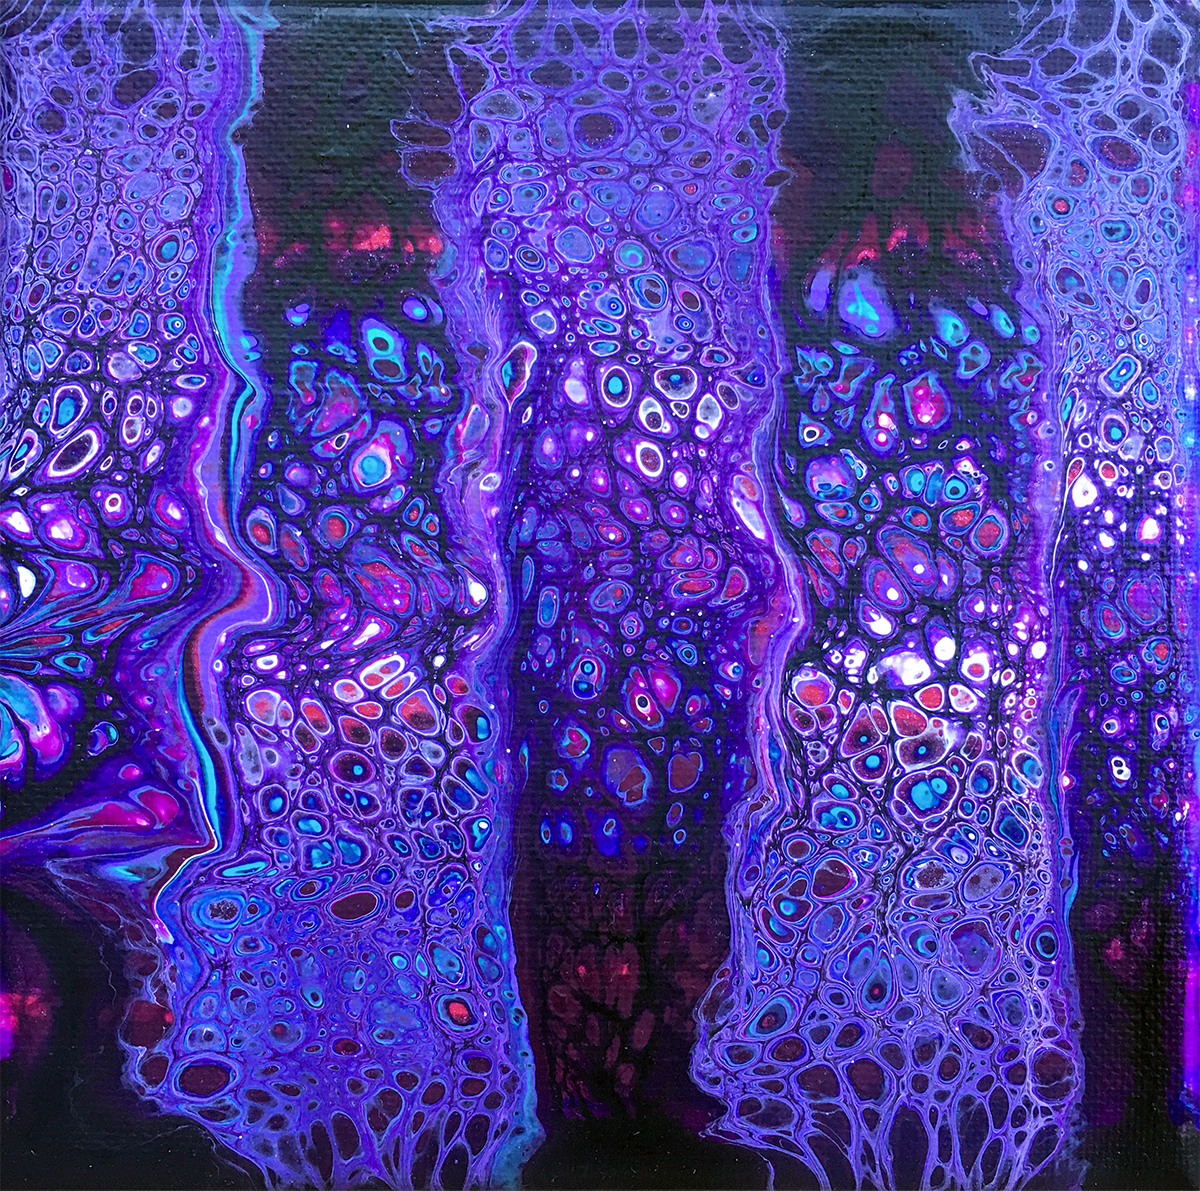 Poured acrylics by Lucy Arnold